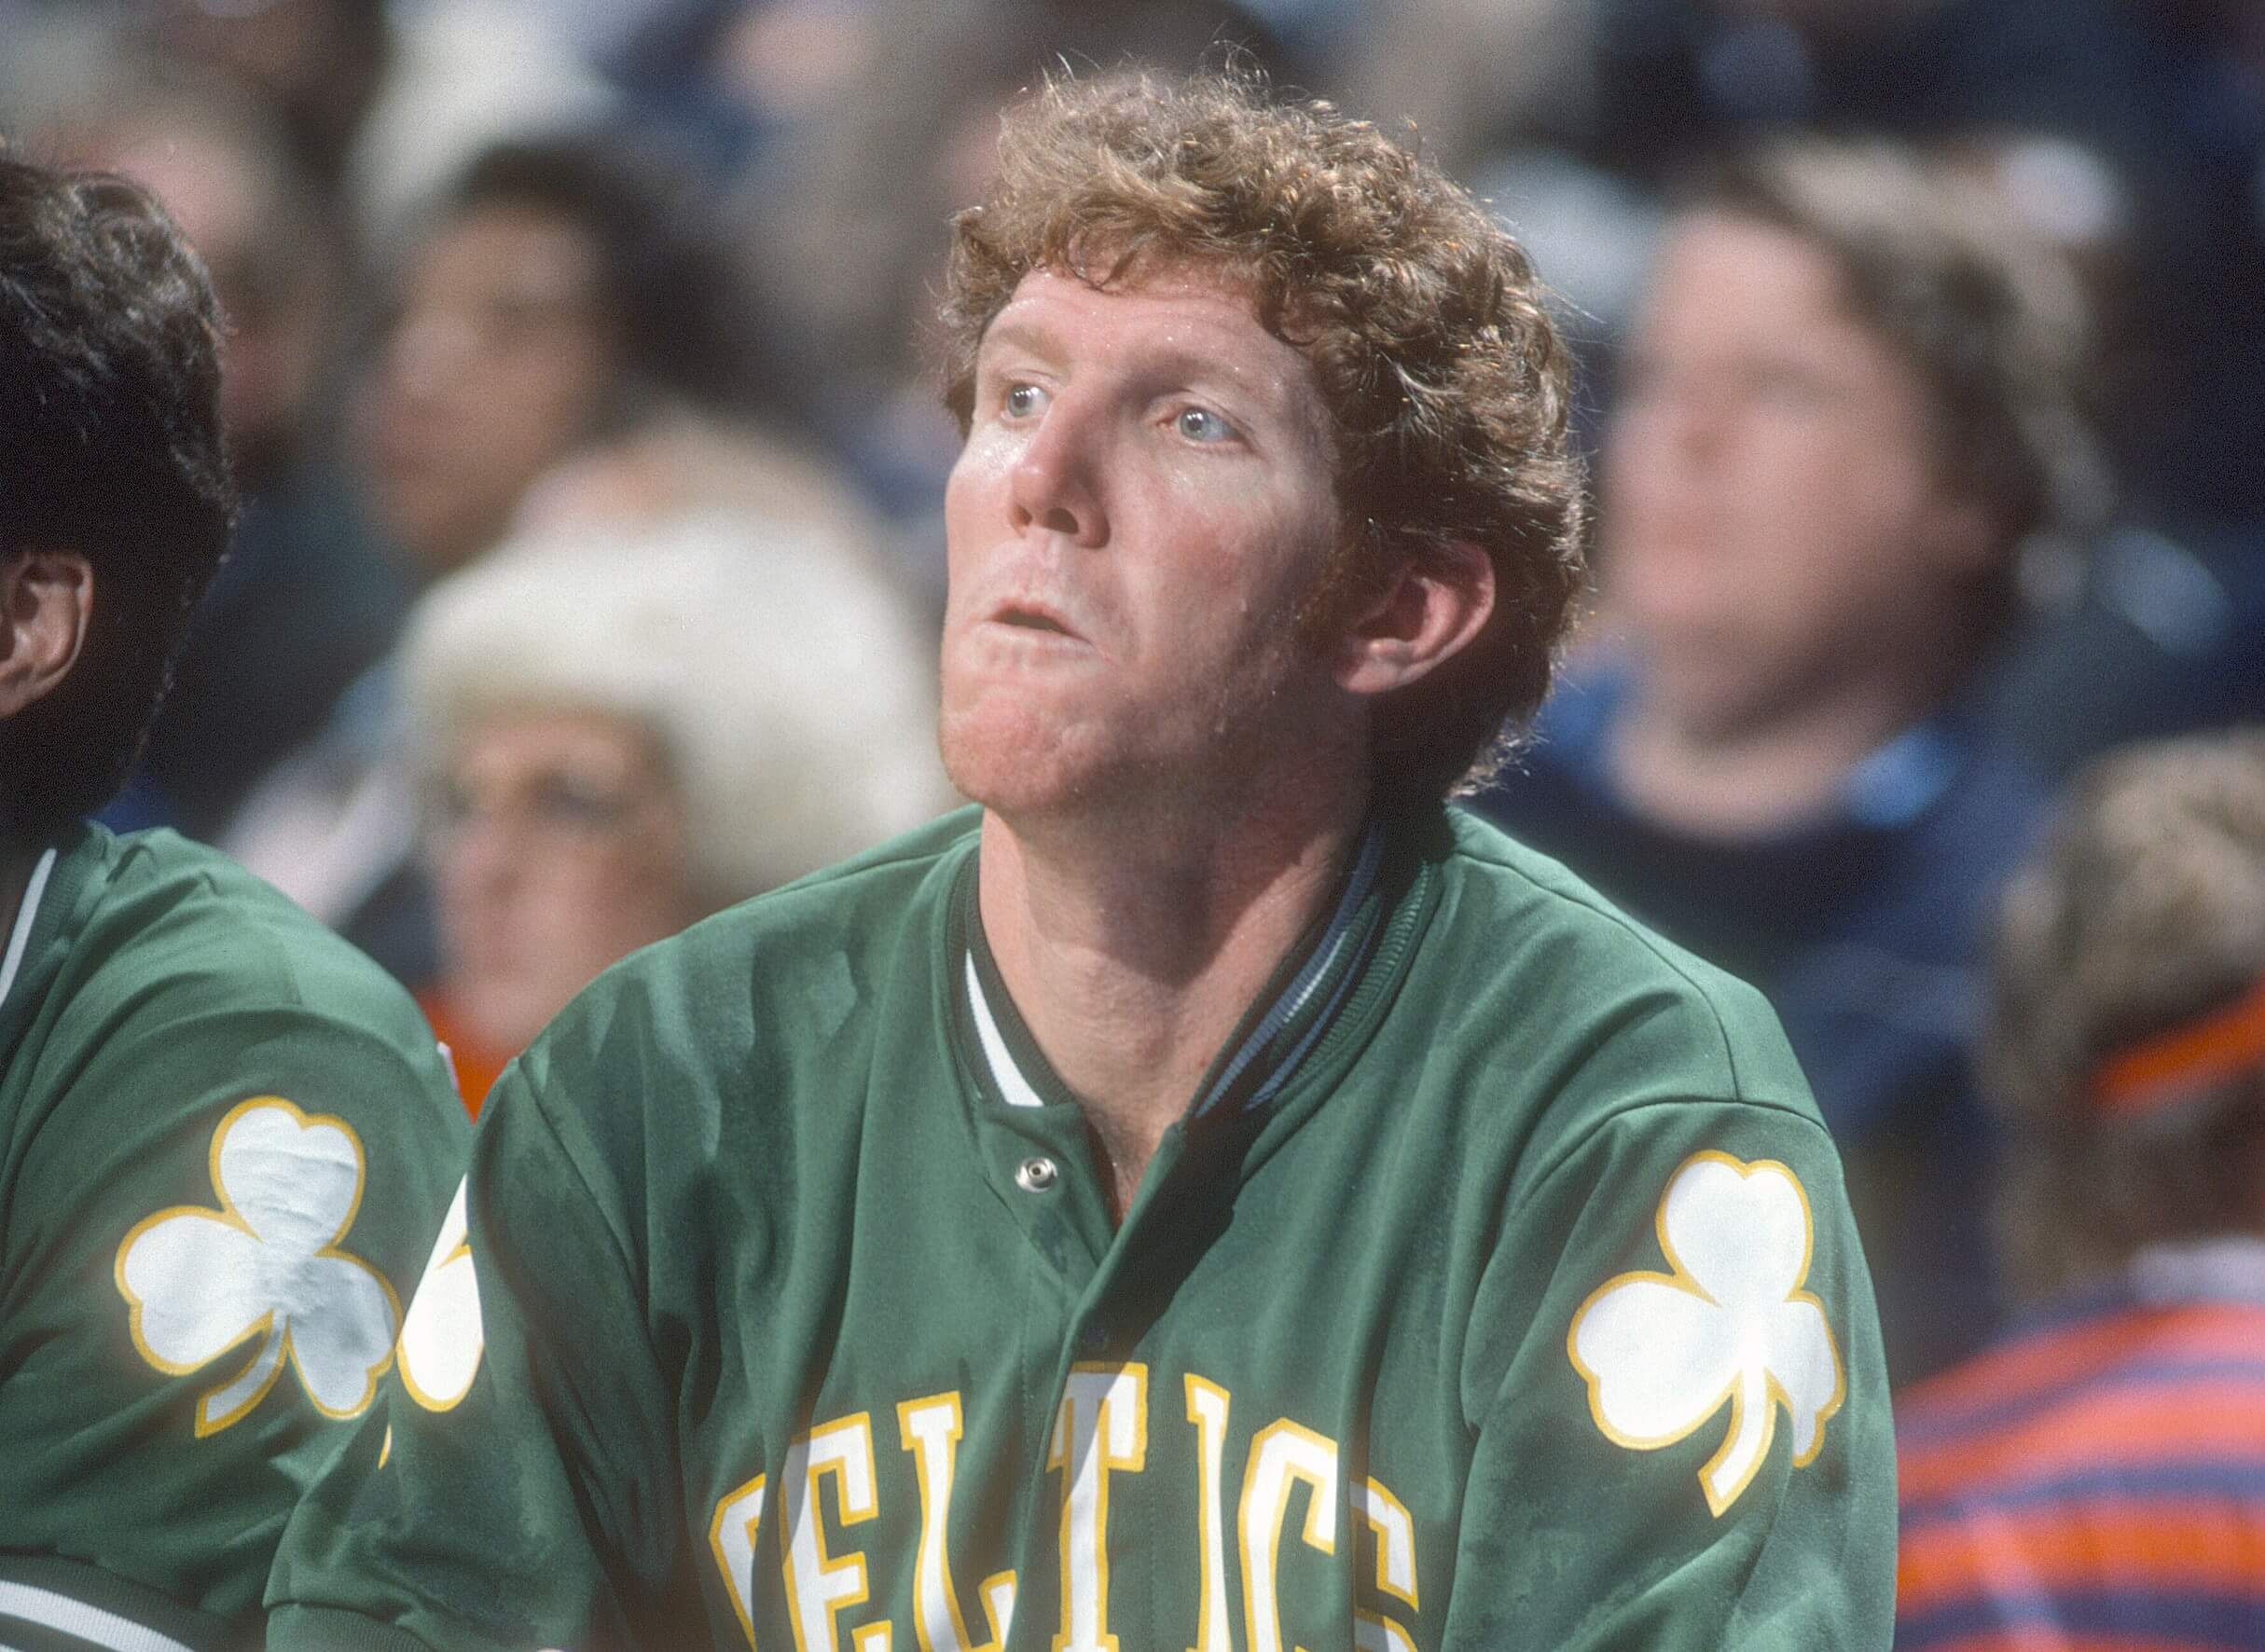 The Boston Celtics Hopes for a Title Repeat in 1987 Came to a Crashing Halt on Dec. 17, 1986